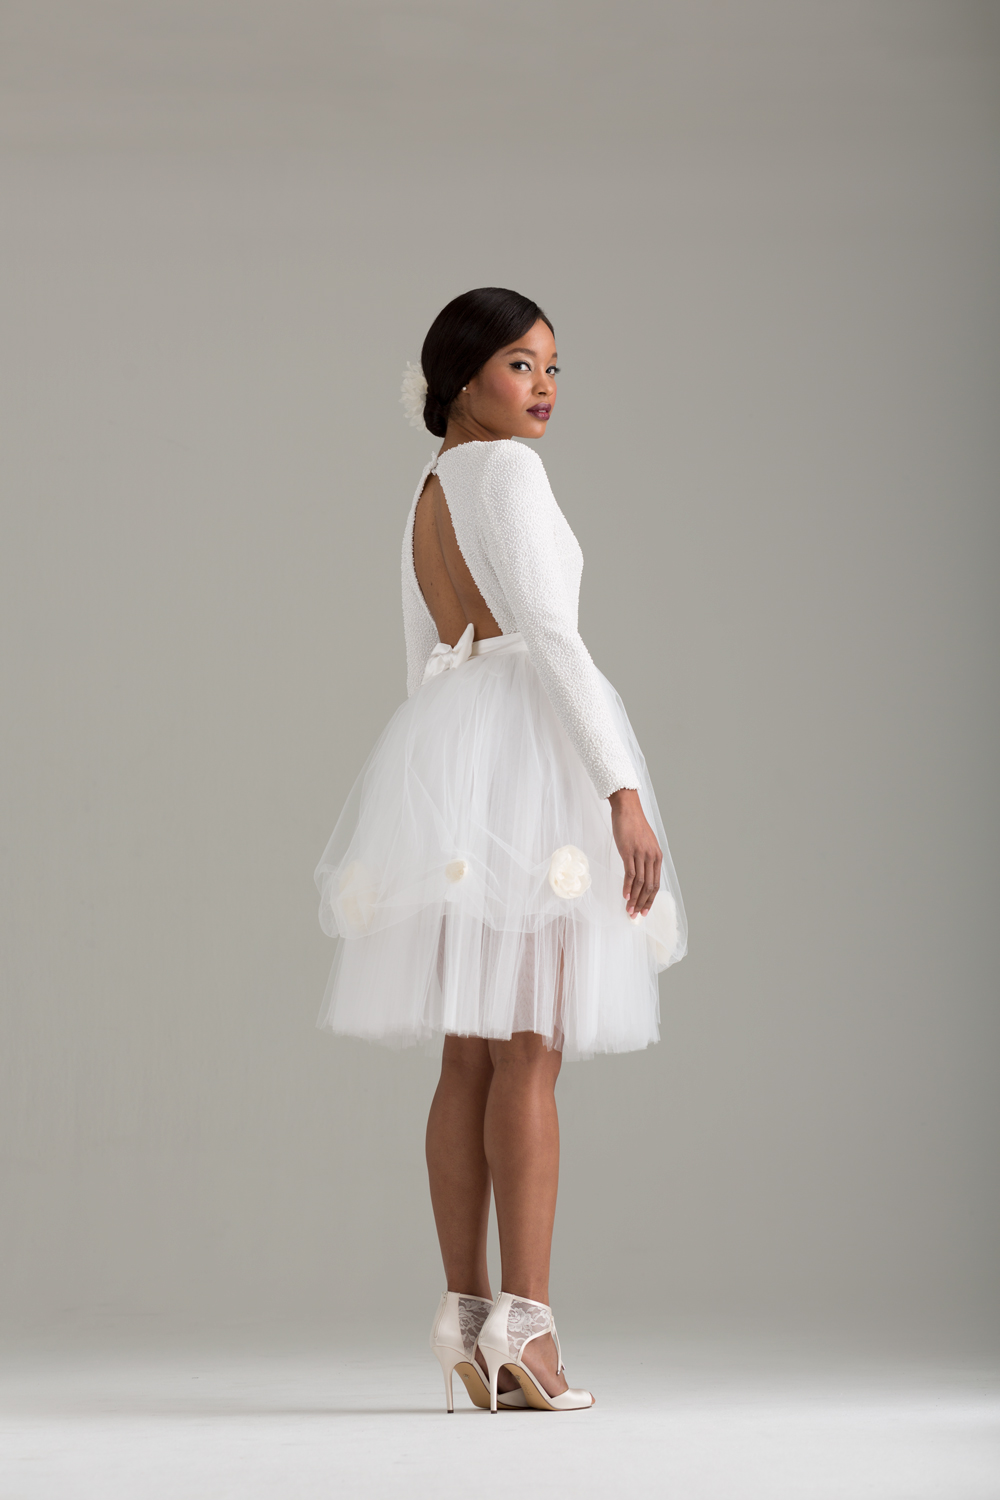    NKB17-81003    "Caryophyllales" White Beaded Top with Cut Out Back &amp;  NKB17-83002  "Peony" White Tulle Skirt  